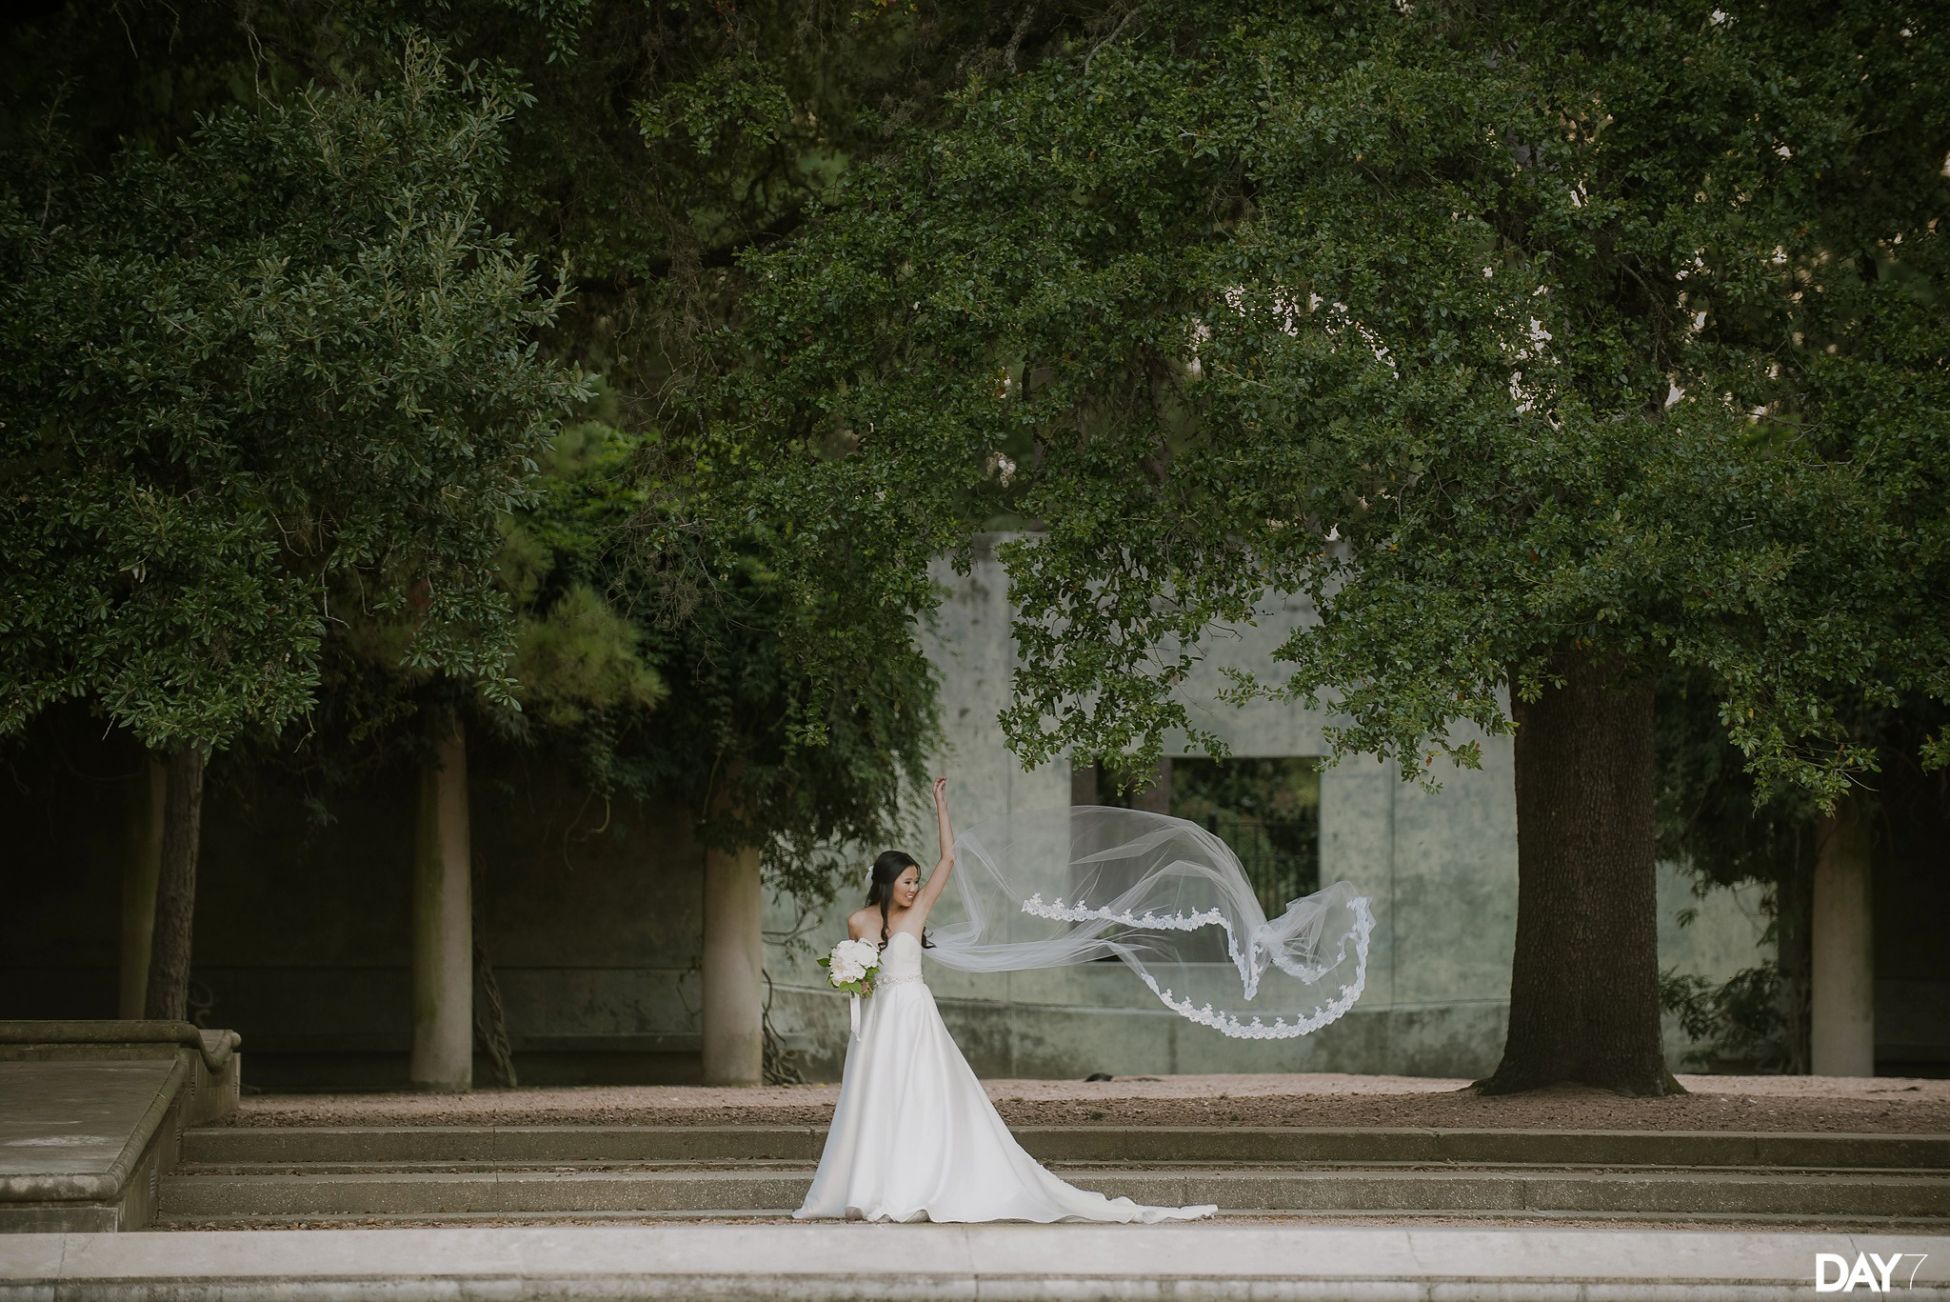 Hermann Park Bridal Photos by Day 7 Photography.